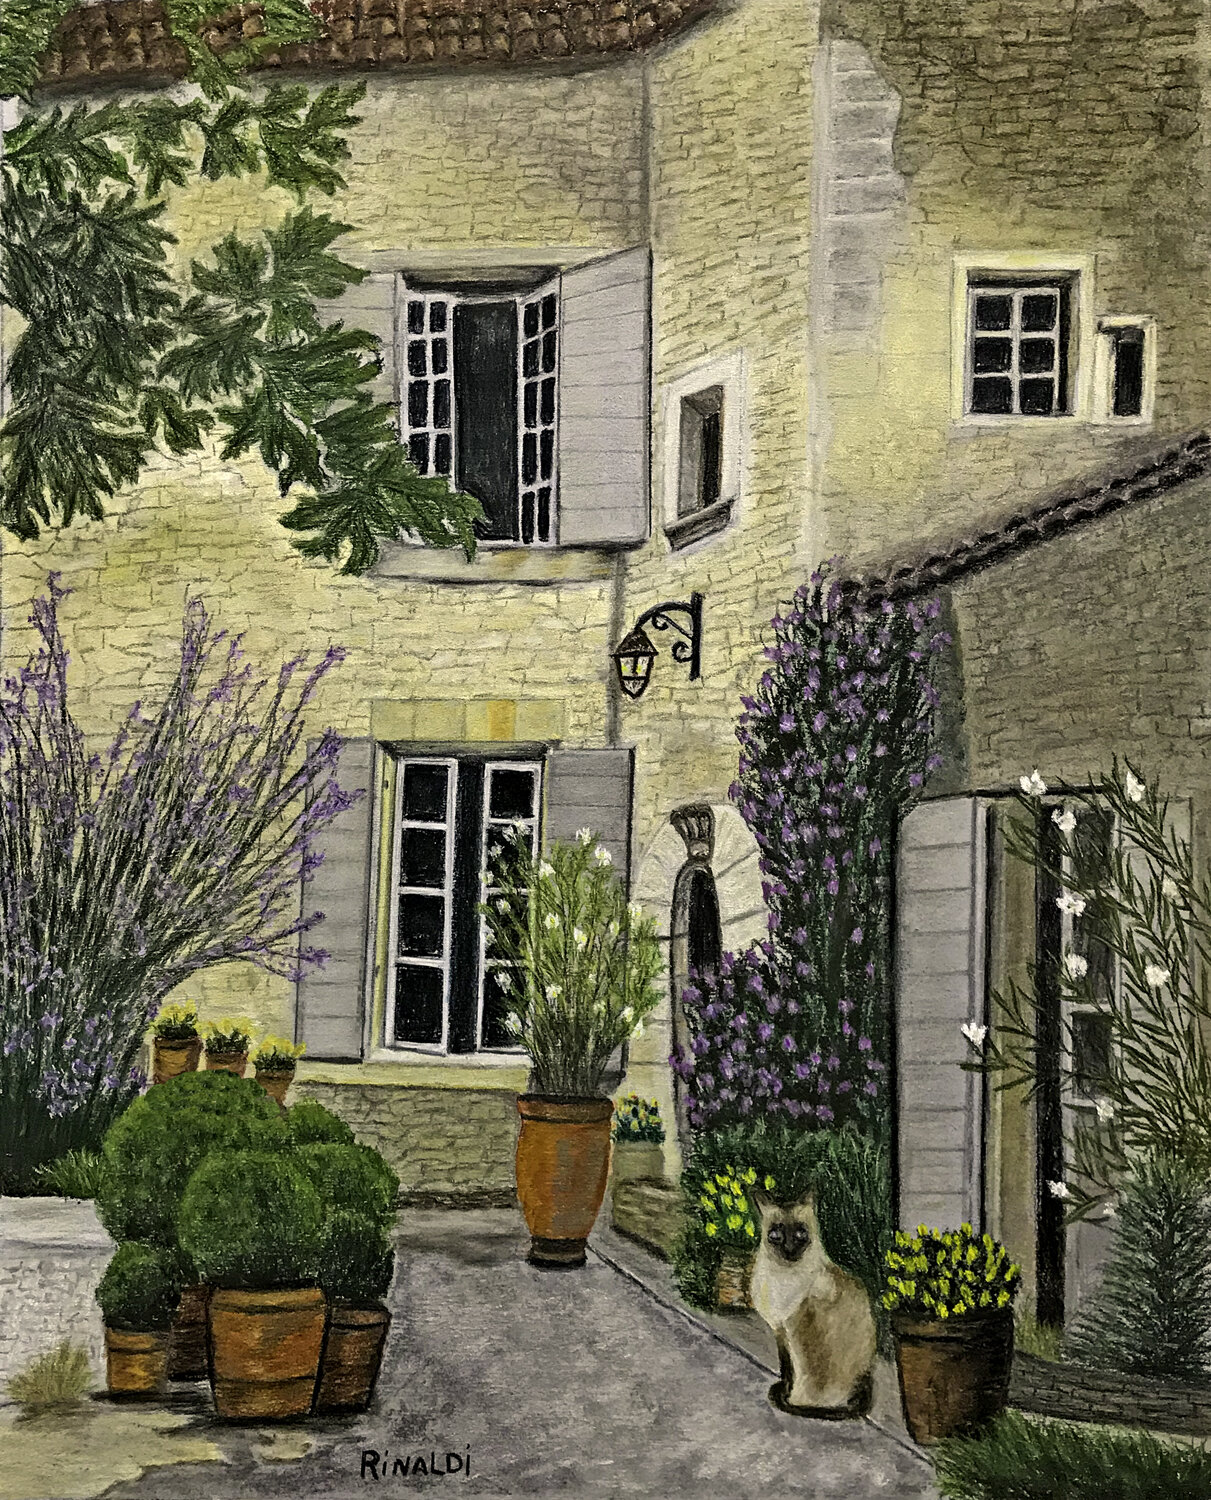 "Cat in the Courtyard"